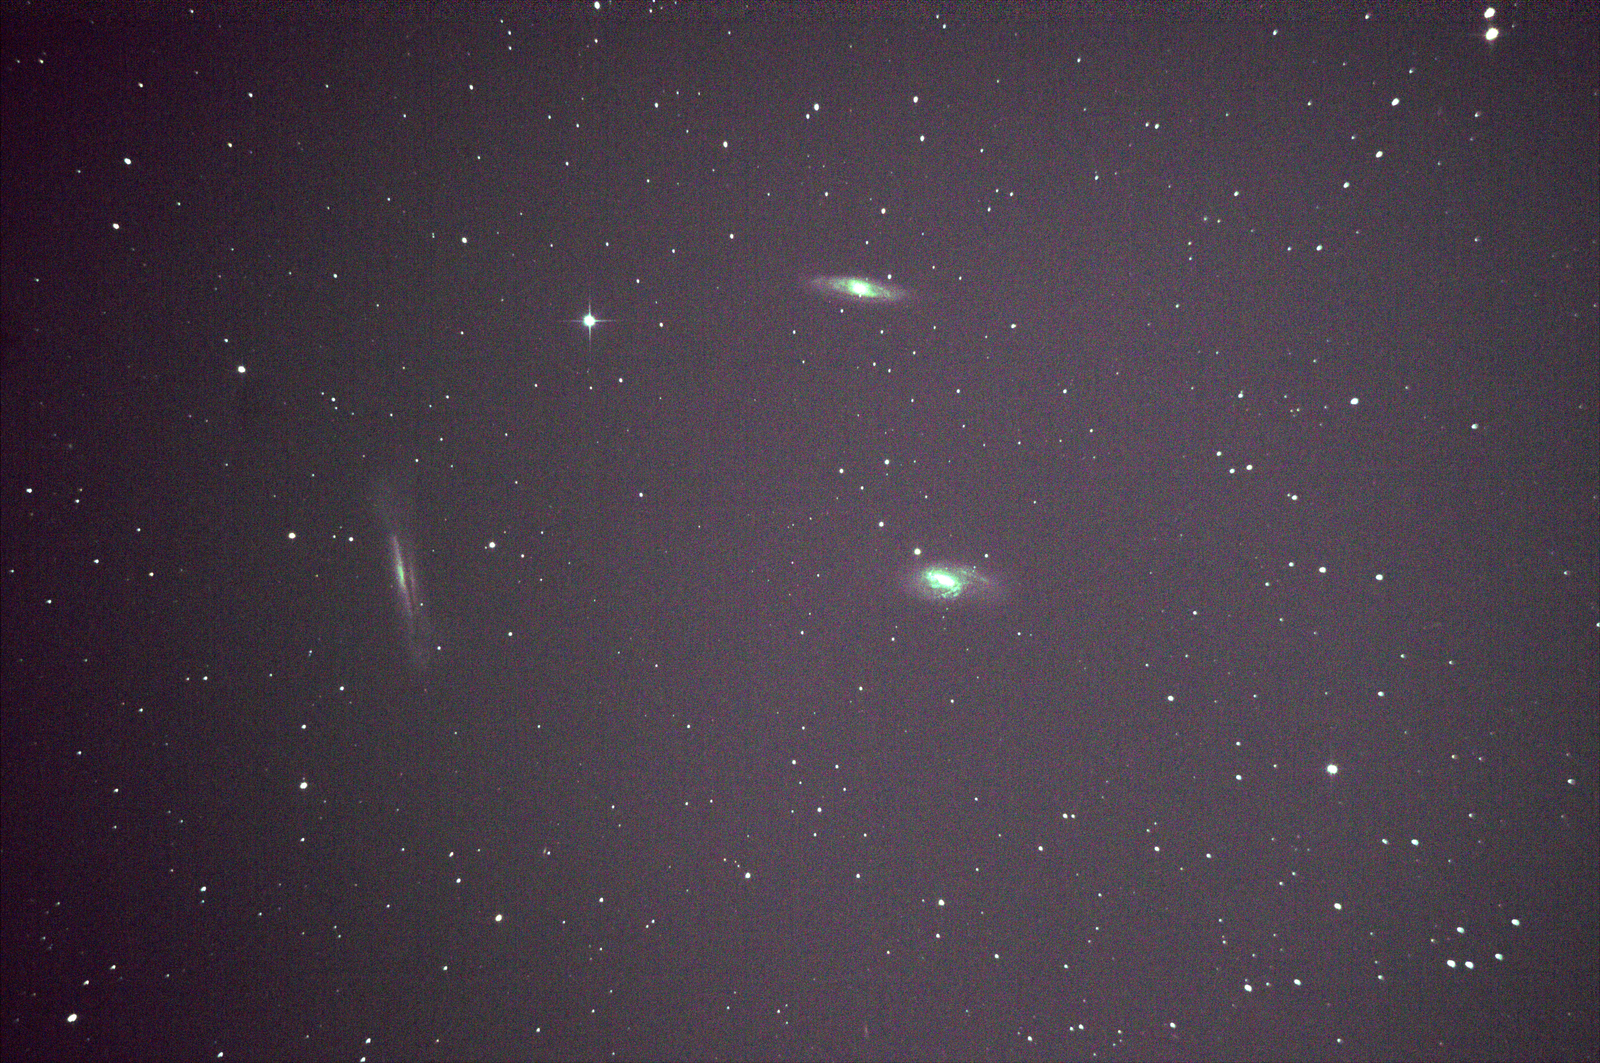 leo_triplet_4min30s_iso800_stacked_stretched_colorbalanced_gimp.png